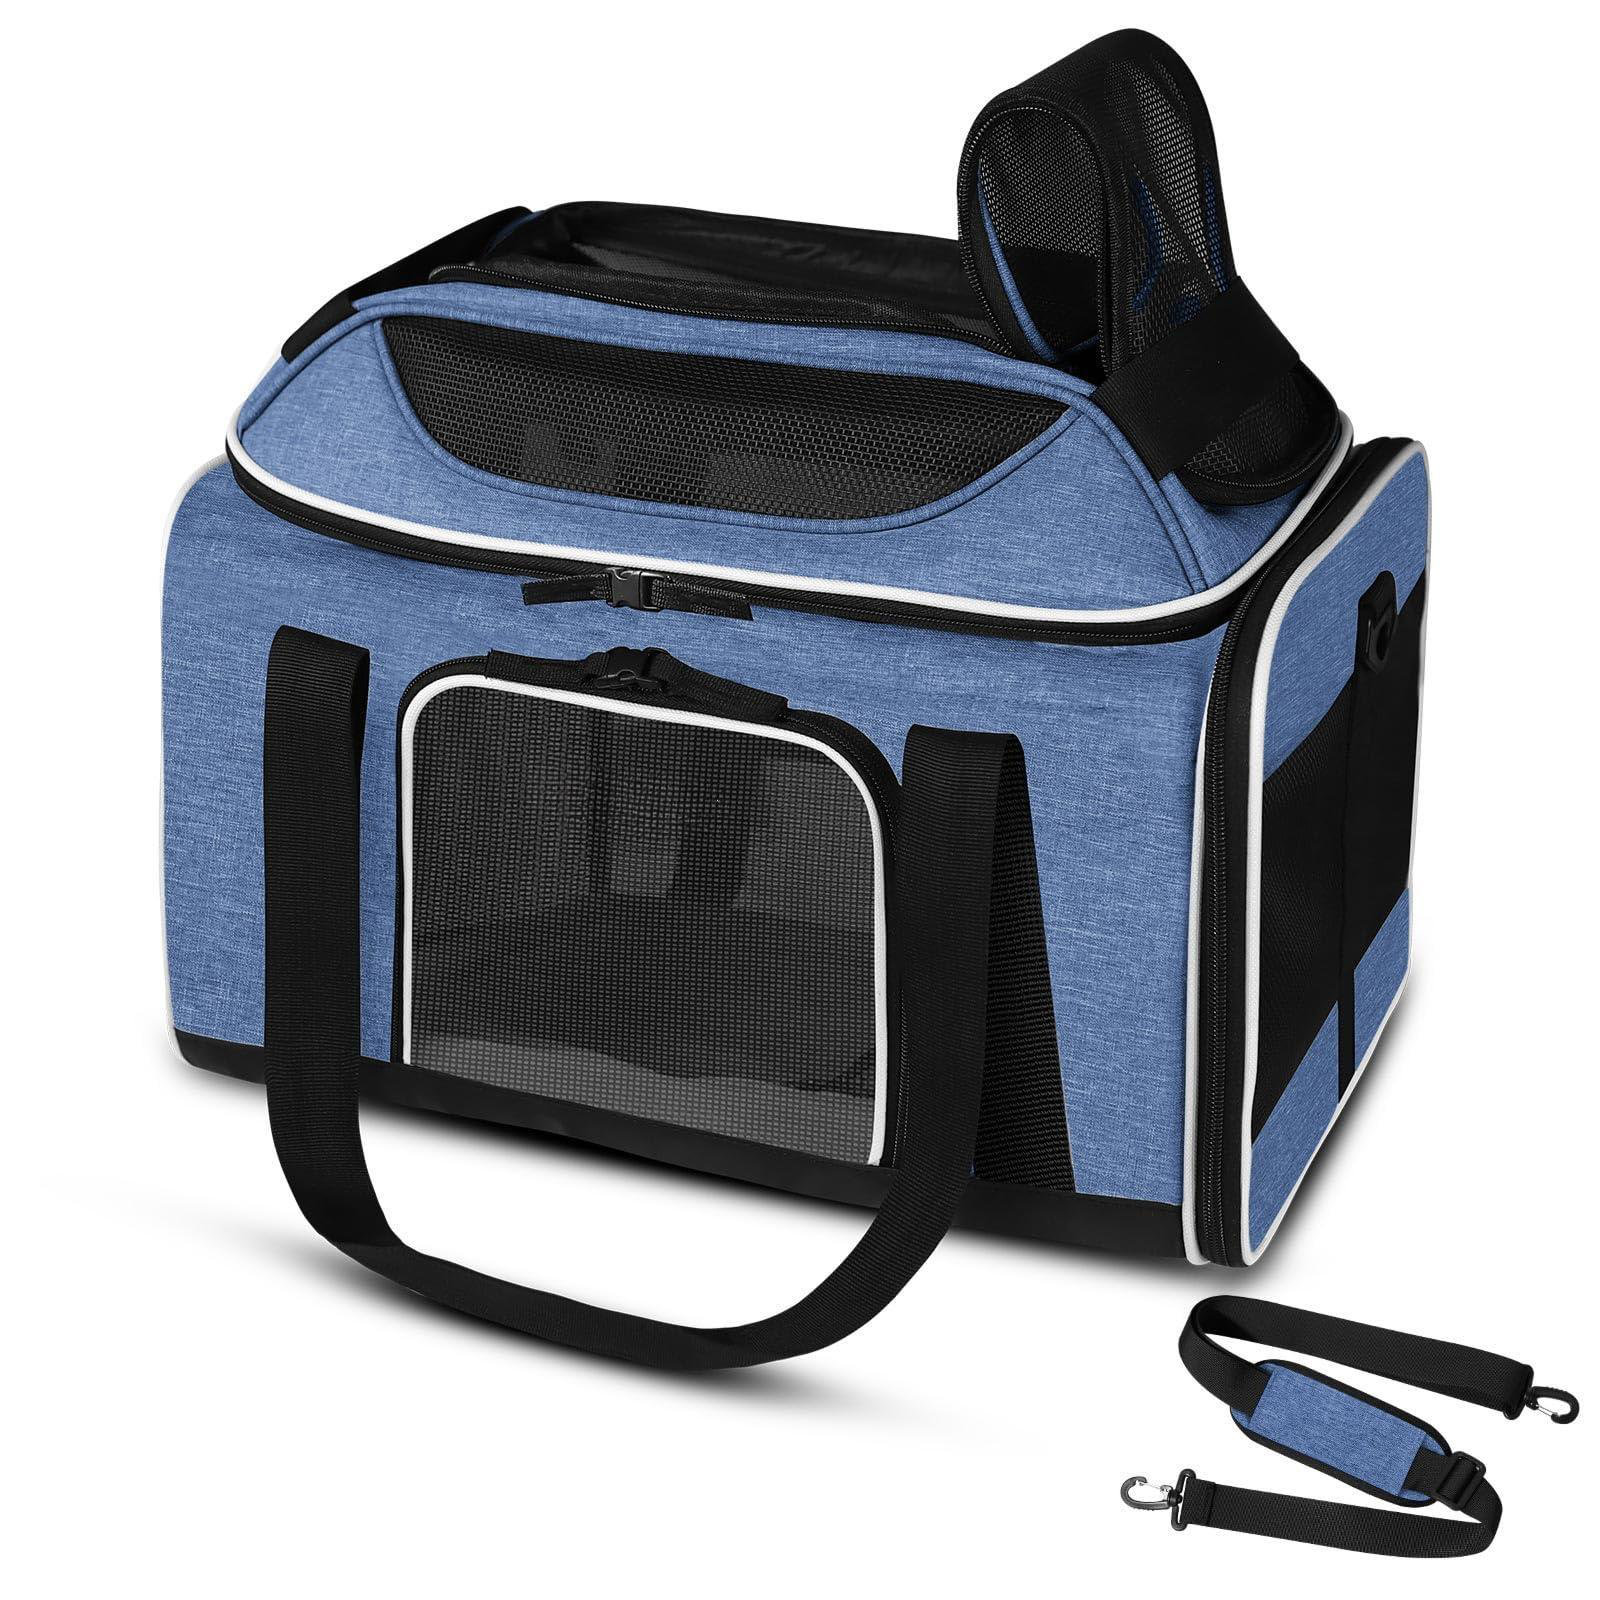 Tucker Murphy Pet Pet Carrier Backpack for Cats, Dogs and Small Animals, Portable Pet Travel Carrier, Super Ventilated Design, Airline Approved, Ideal